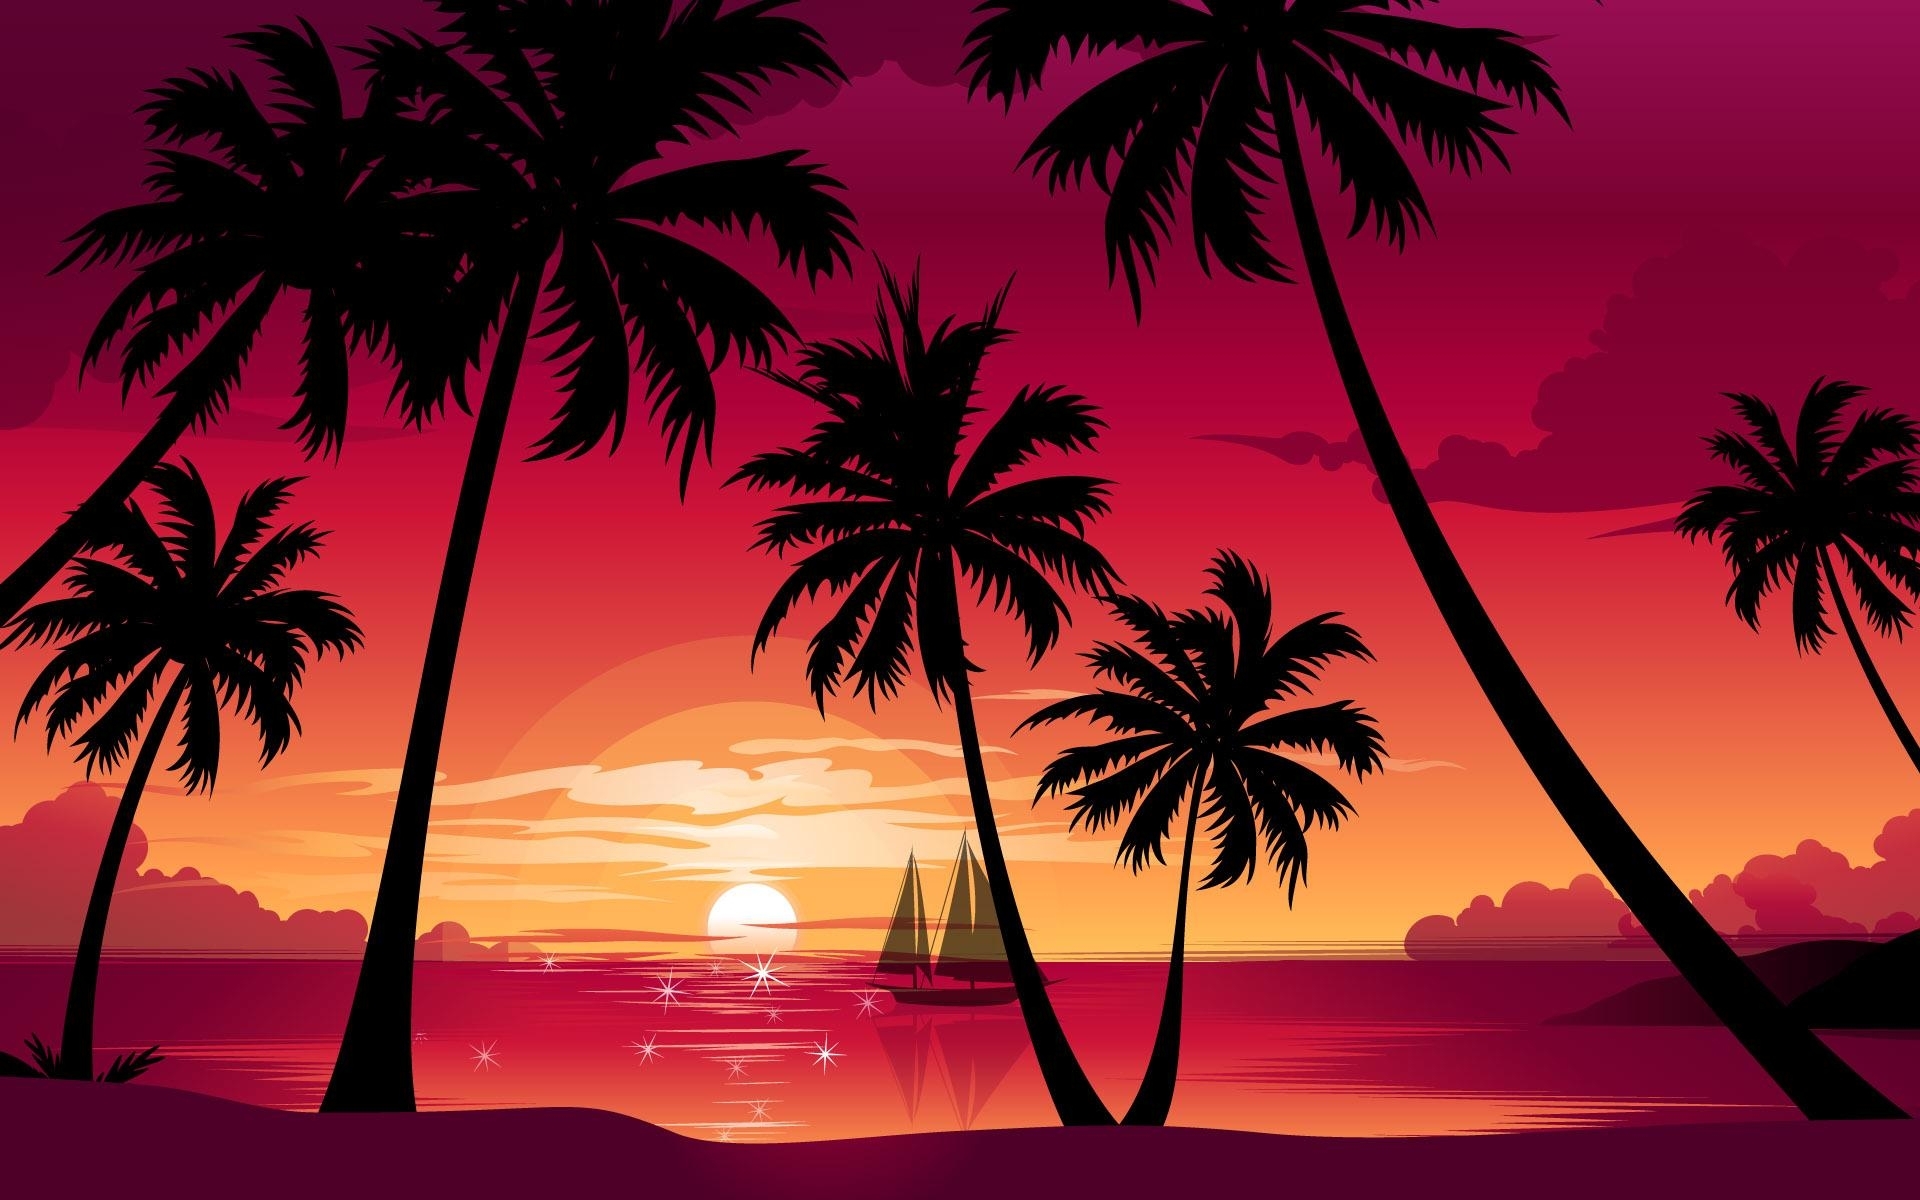 pictures, palms, red, sunset, landscape